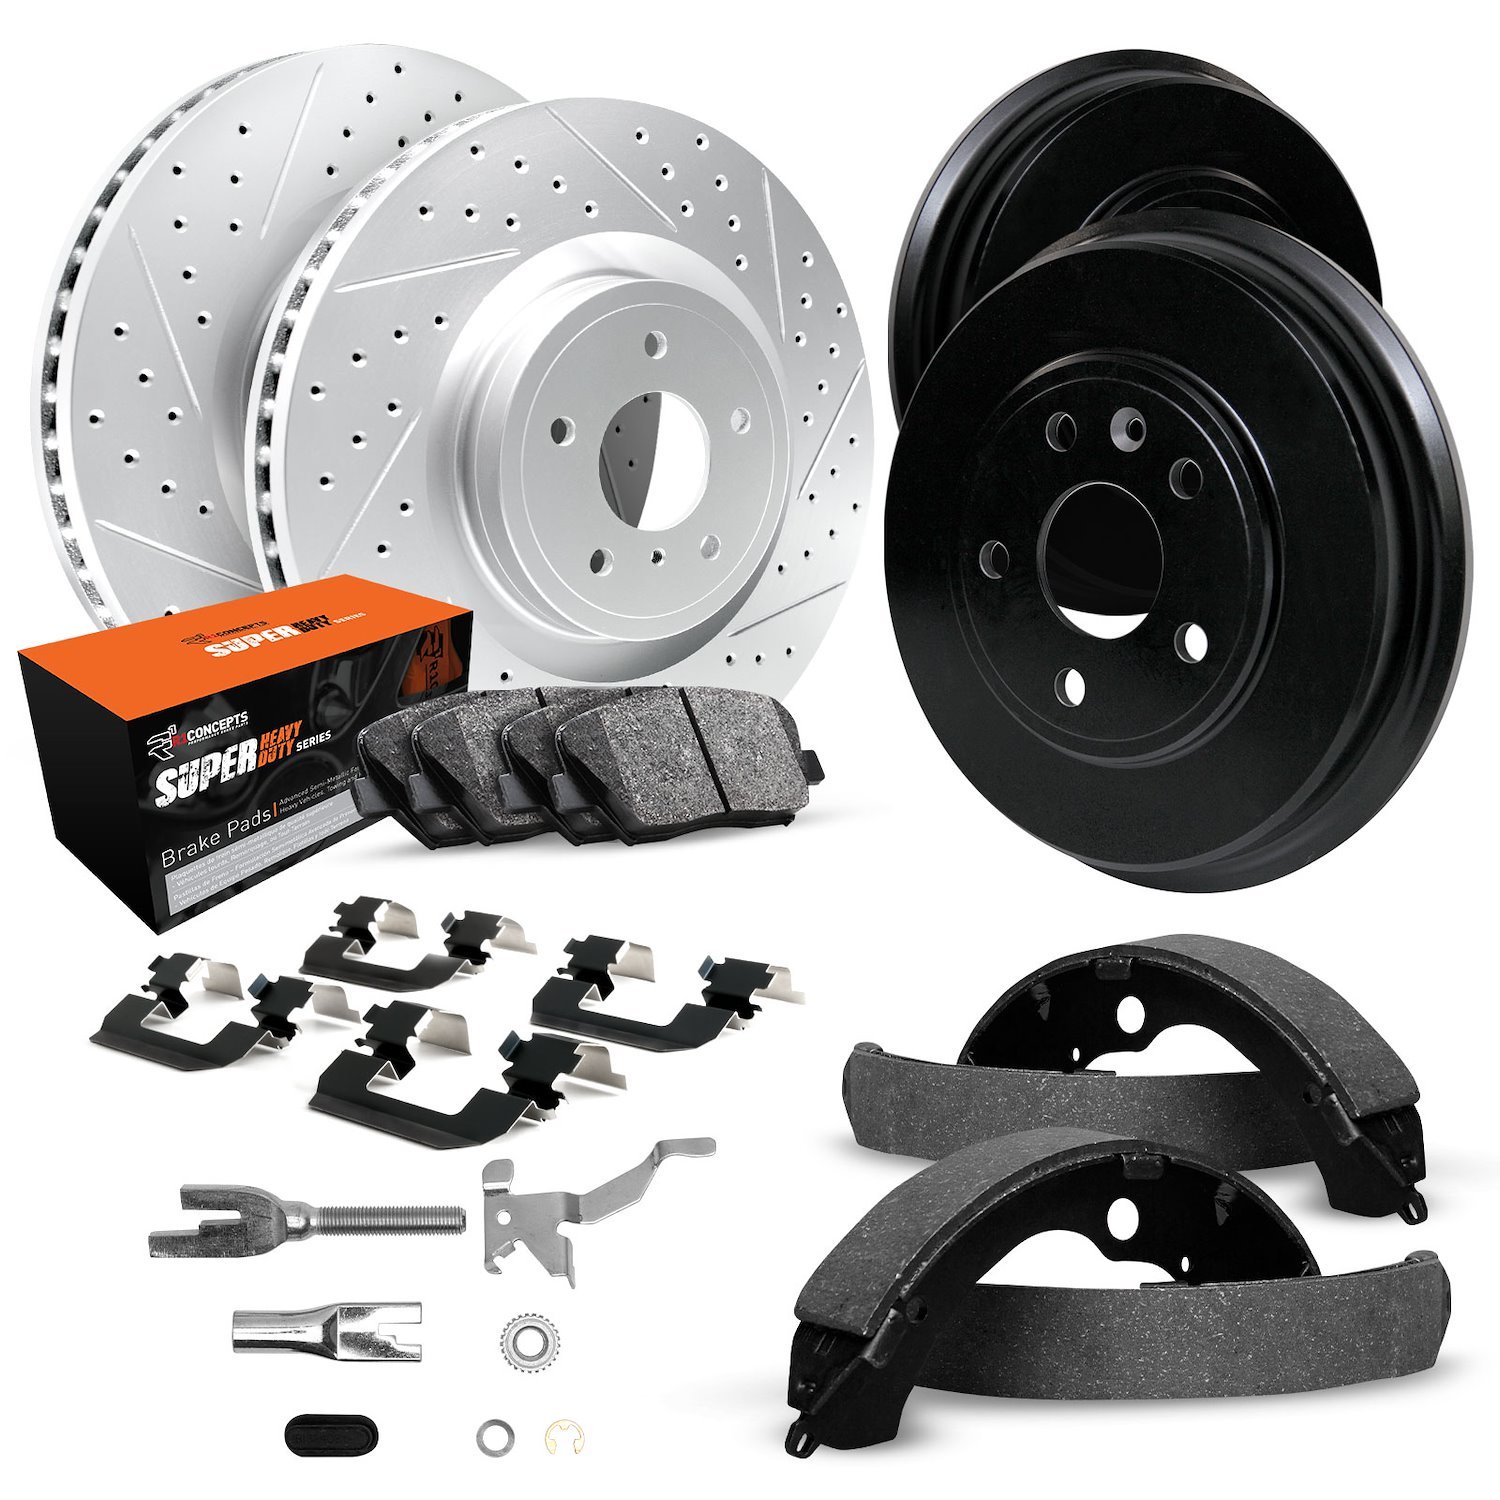 GEO-Carbon Drilled/Slotted Rotors/Drums w/Super-Duty Pads/Shoes/Hardware/Adjusters, 1999-2001 Mopar, Position: Front/Rear